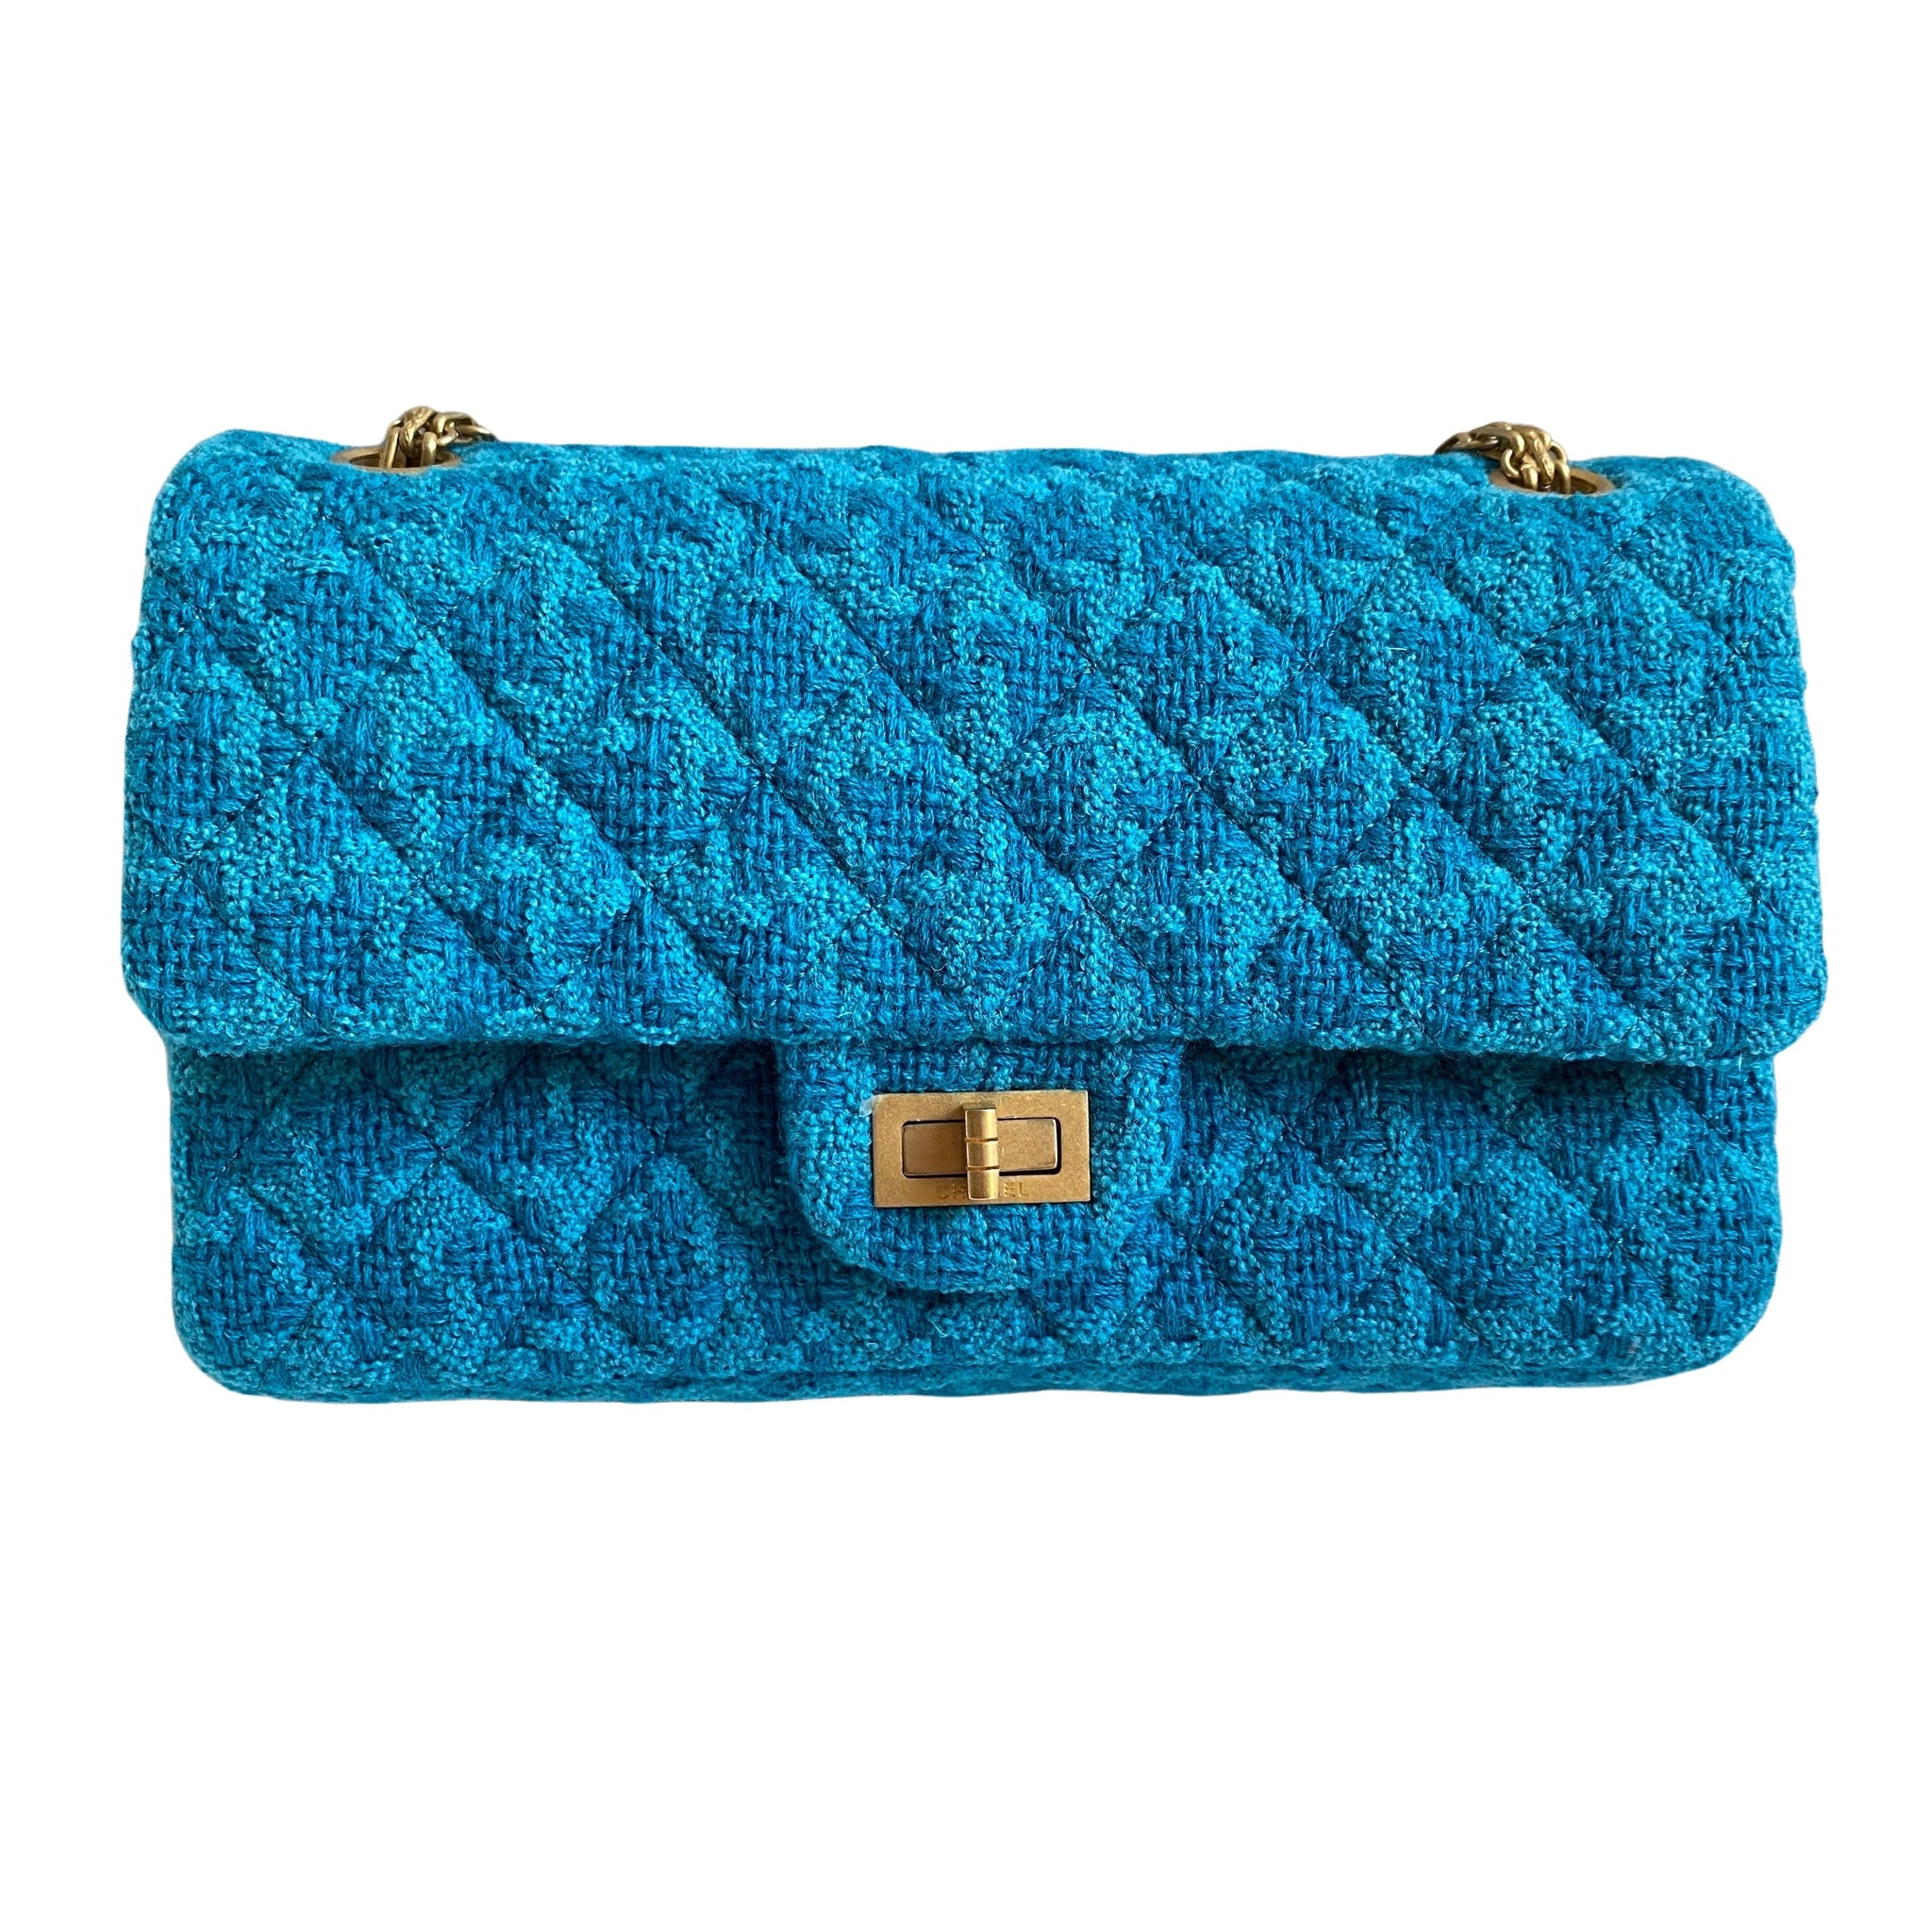 sennep Bule Overlevelse CHANEL 2.55 Reissue Flap Bag Size 225 in Turquoise Houndstooth Tweed |  Dearluxe